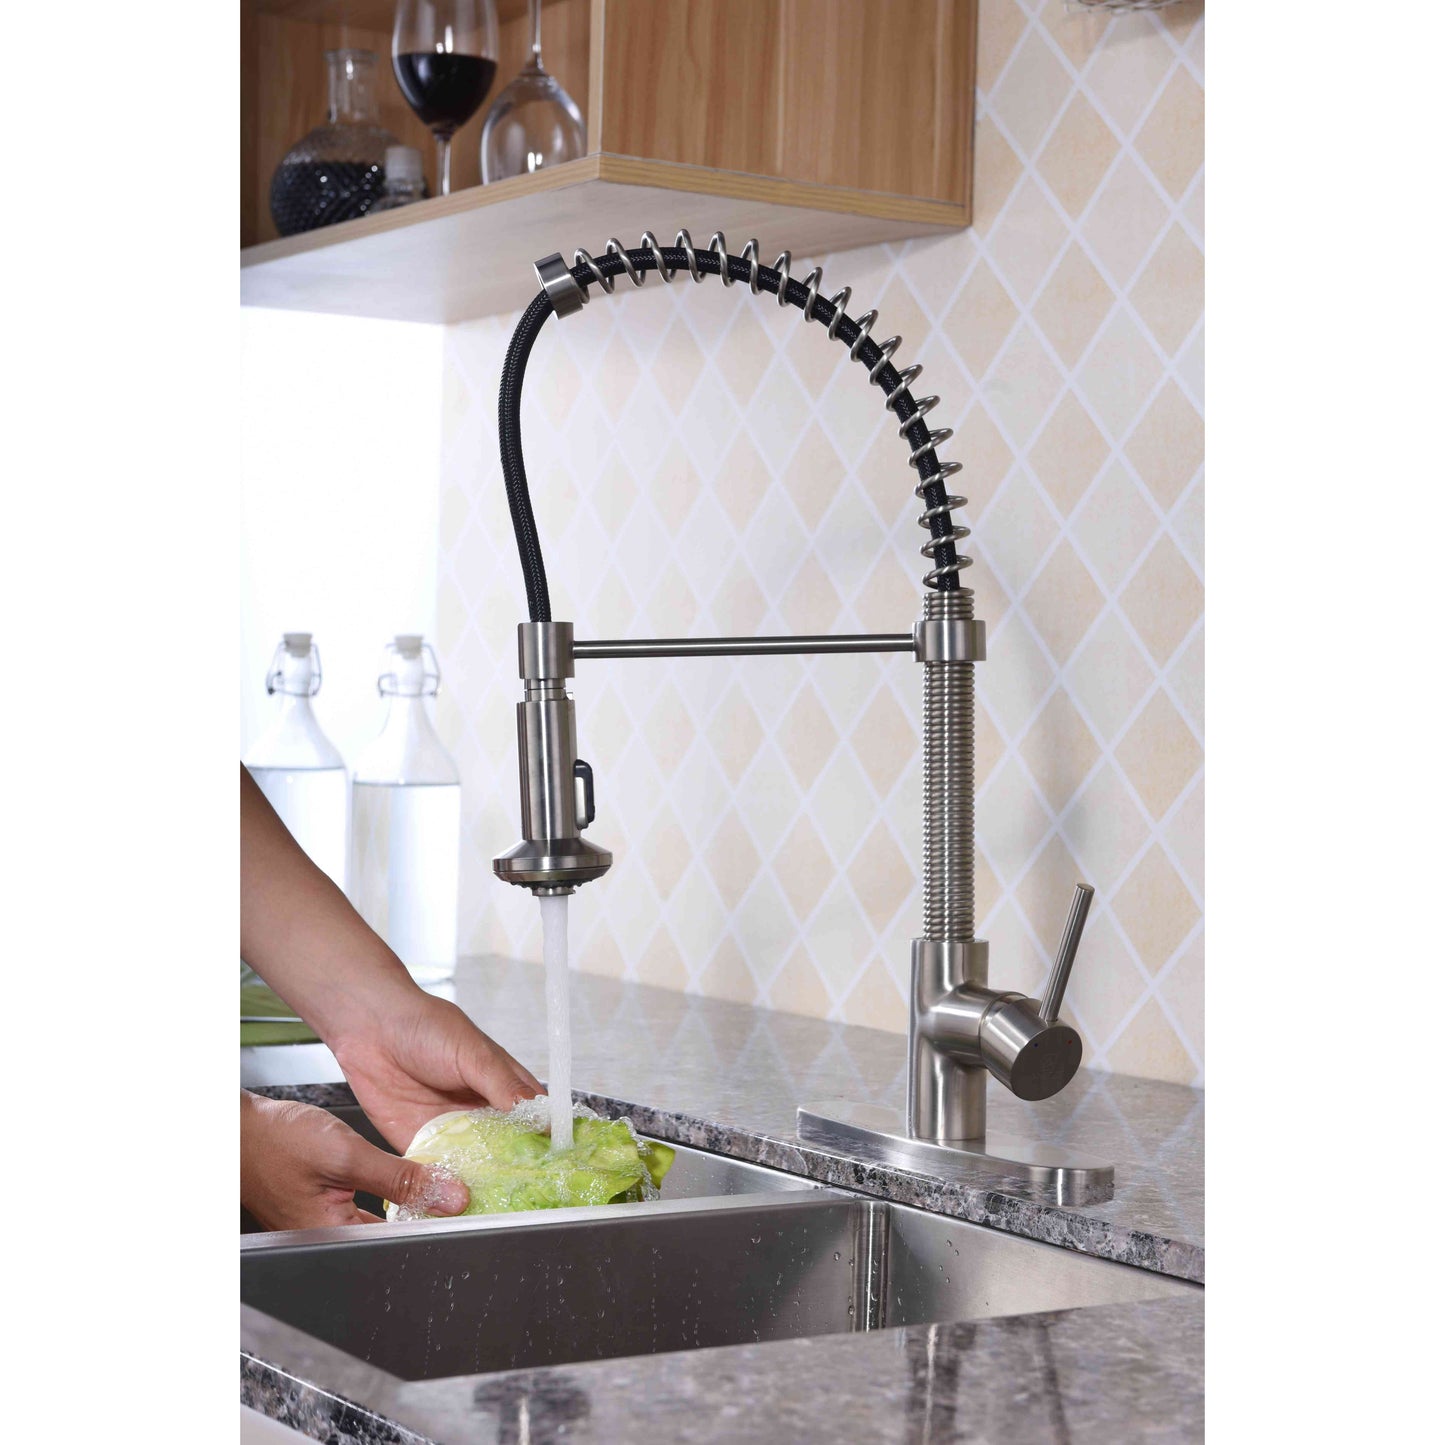 ANZZI Step Series Single Hole Brushed Nickel Kitchen Faucet With Euro-Grip Pull Down Sprayer